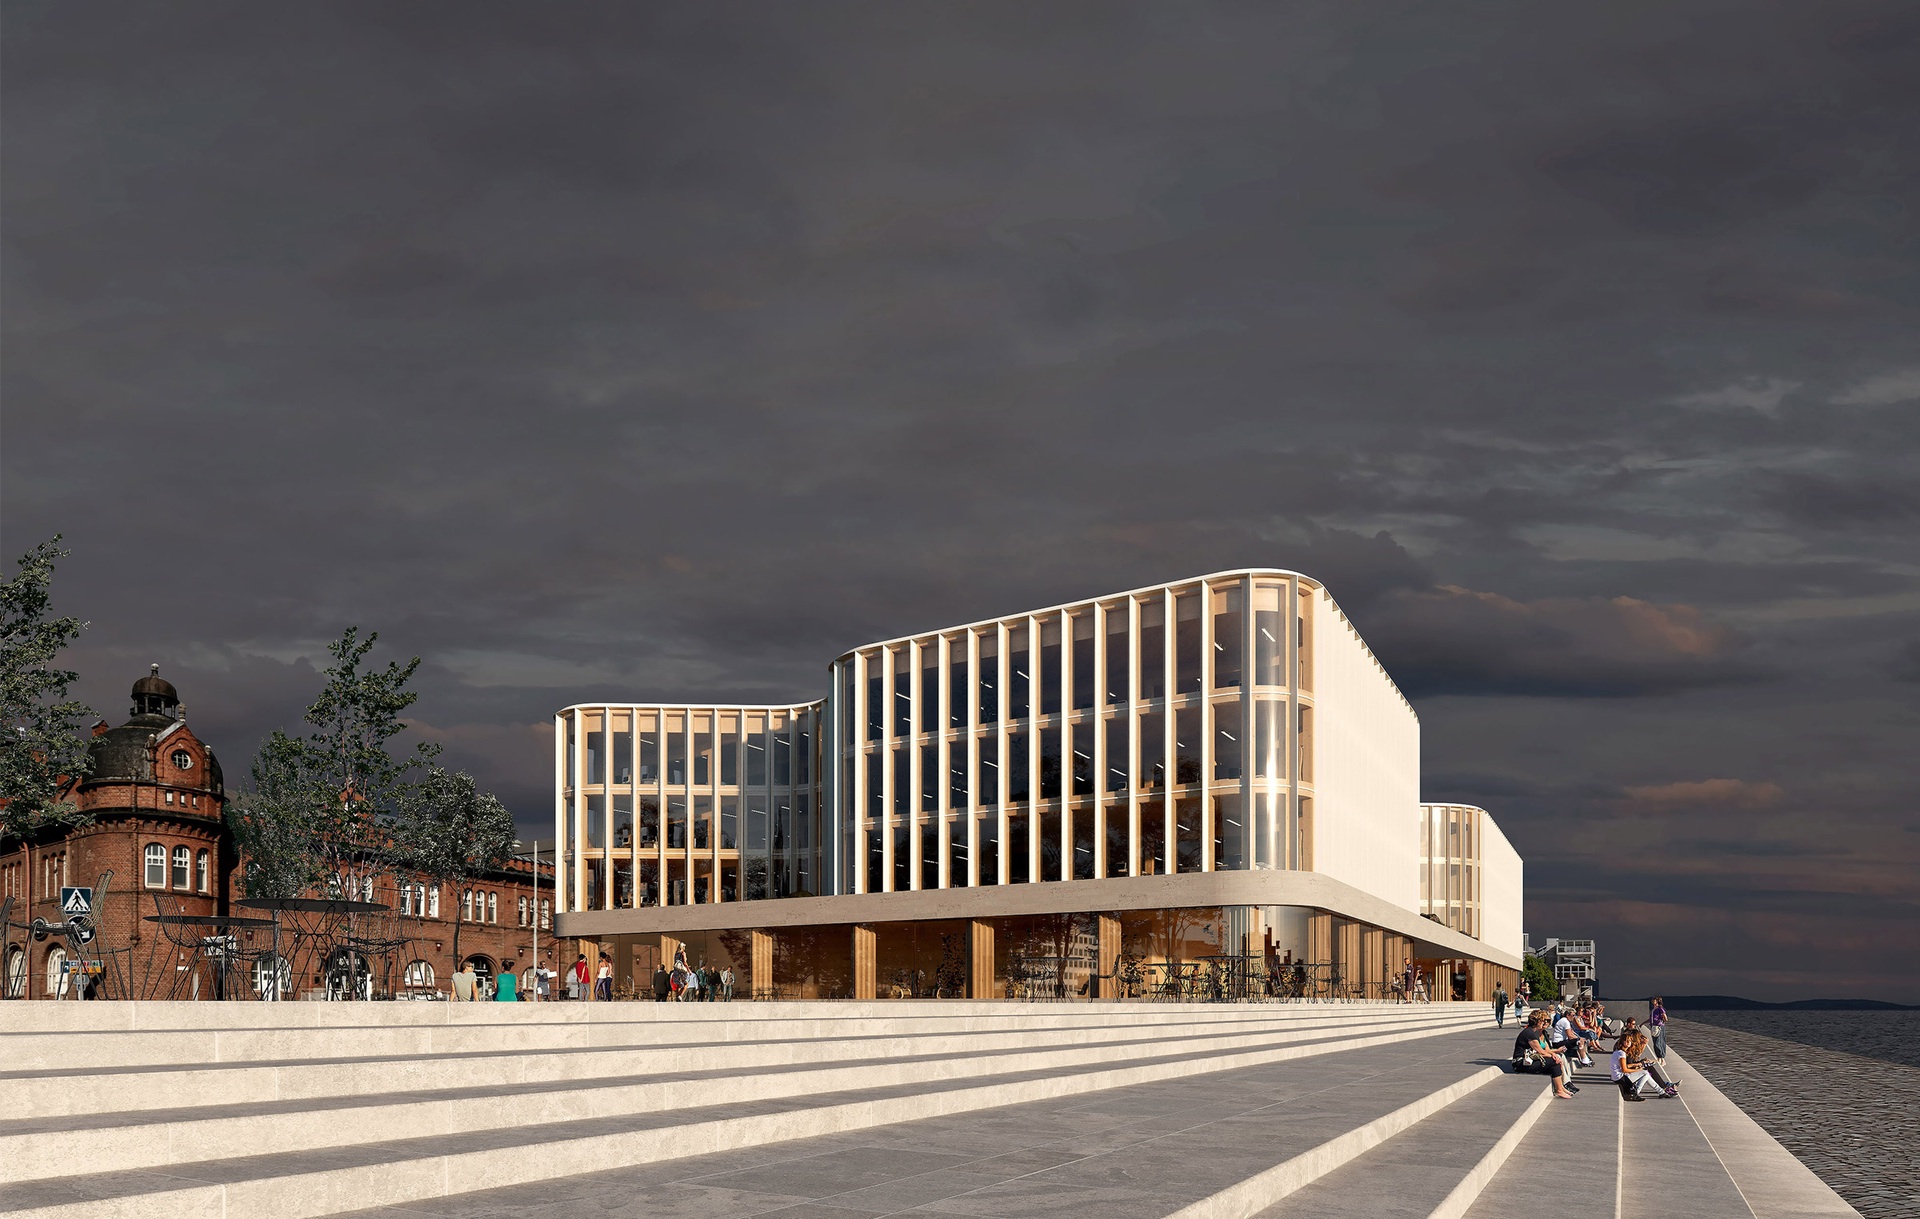 Helsinki’s latest timber commercial building ate 6,000 tonnes of CO2